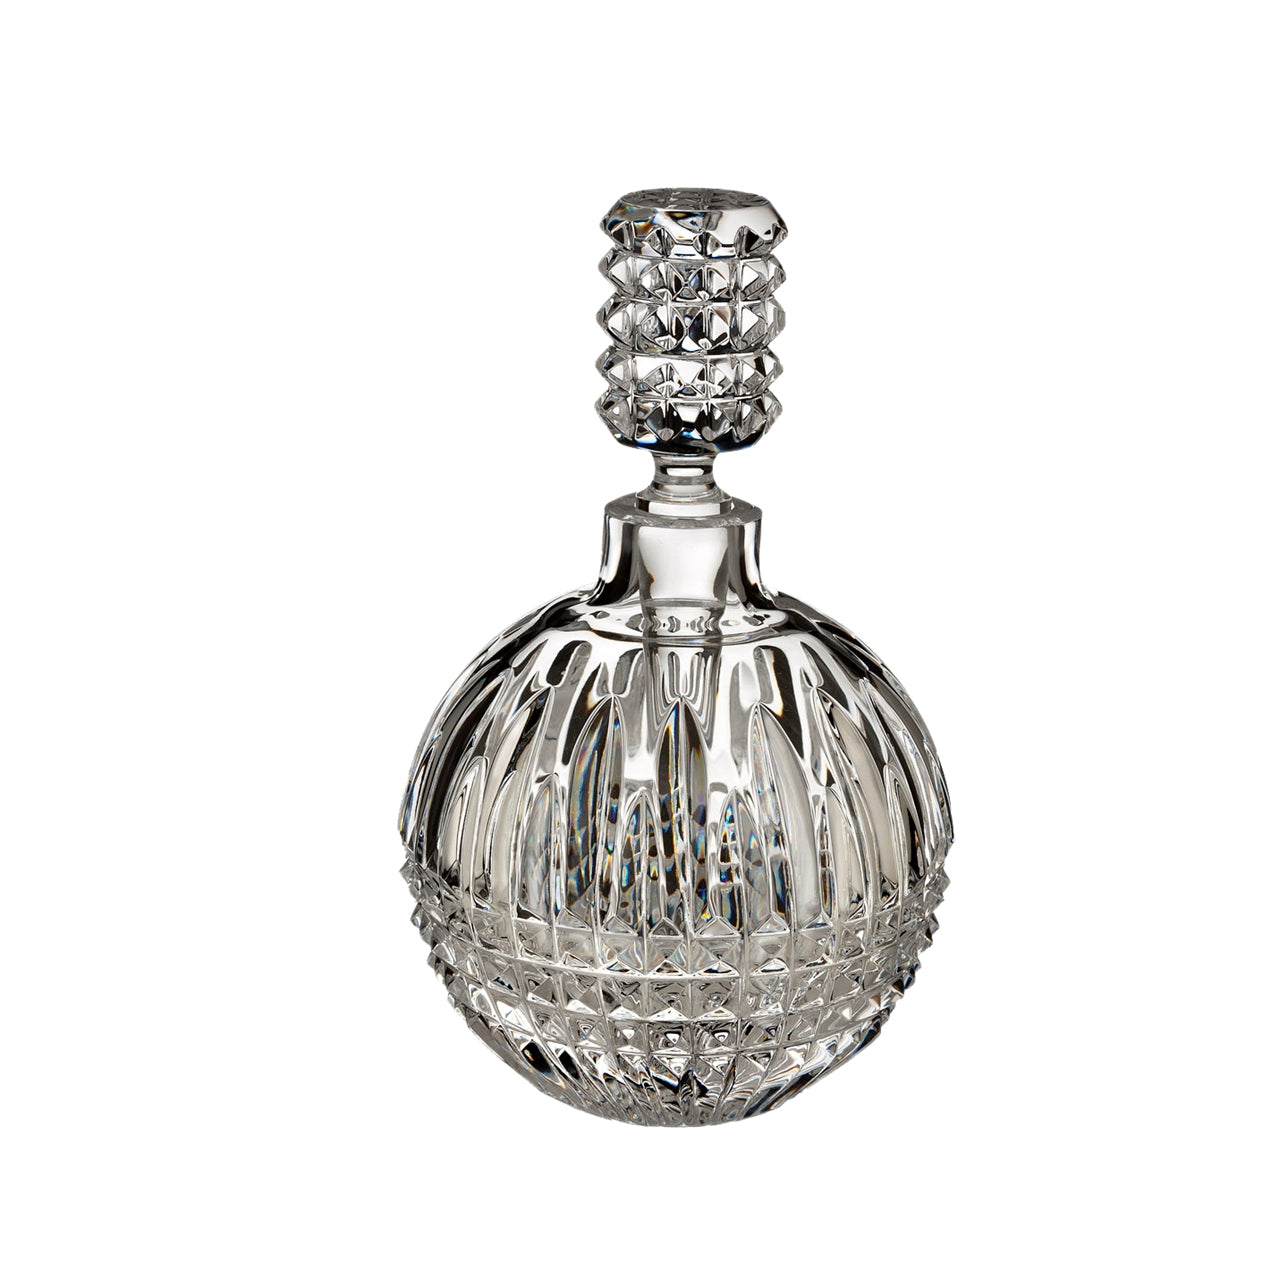 Waterford Crystal Lismore Diamond Perfume Bottle Tall  By Waterford Crystal, Unique, feminine gifts for the nightstand or dressing table. These beautiful crystal bedside essentials feature the distinctive Lismore Diamond cutting pattern perfect for birthdays, showers or thoughtful remembrance.